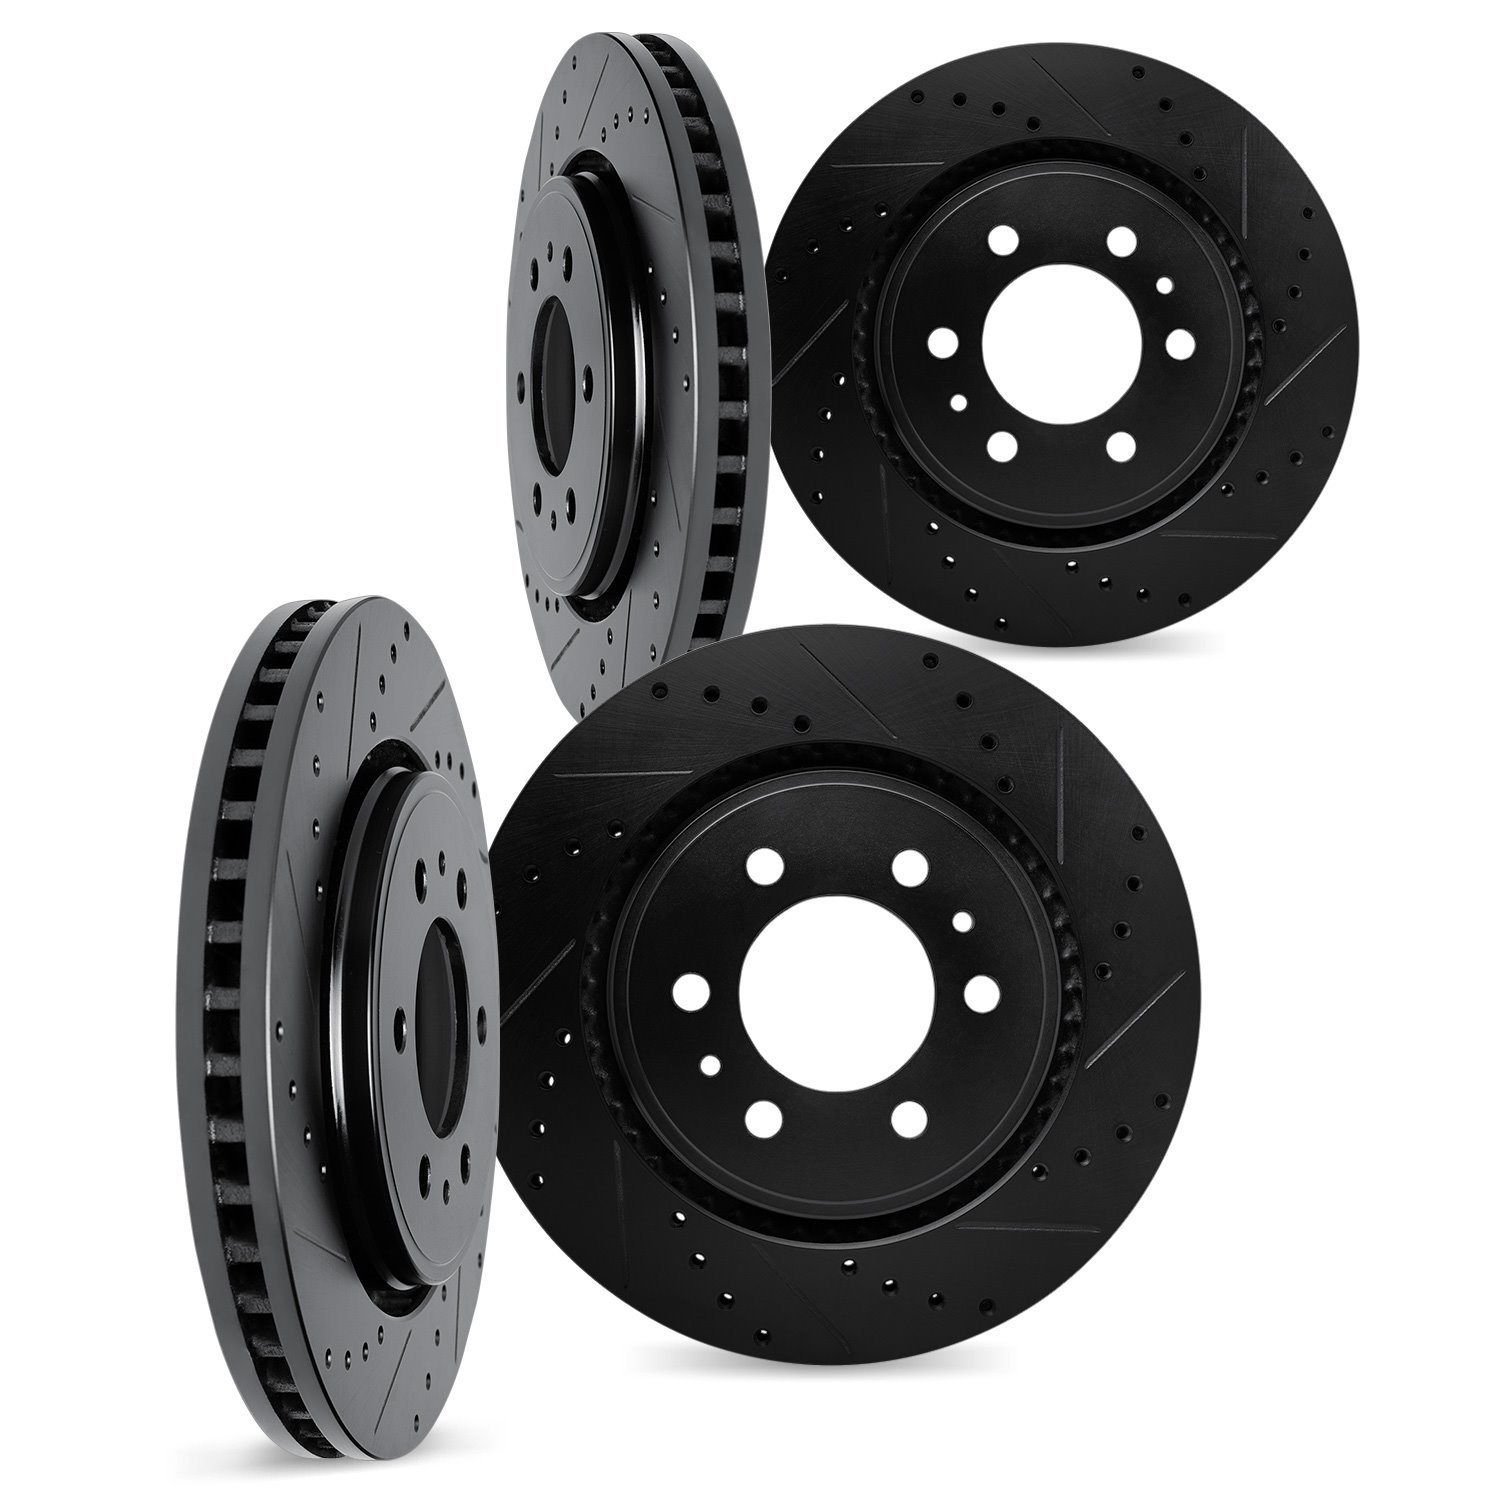 8004-54377 Drilled/Slotted Brake Rotors [Black], Fits Select Ford/Lincoln/Mercury/Mazda, Position: Front and Rear